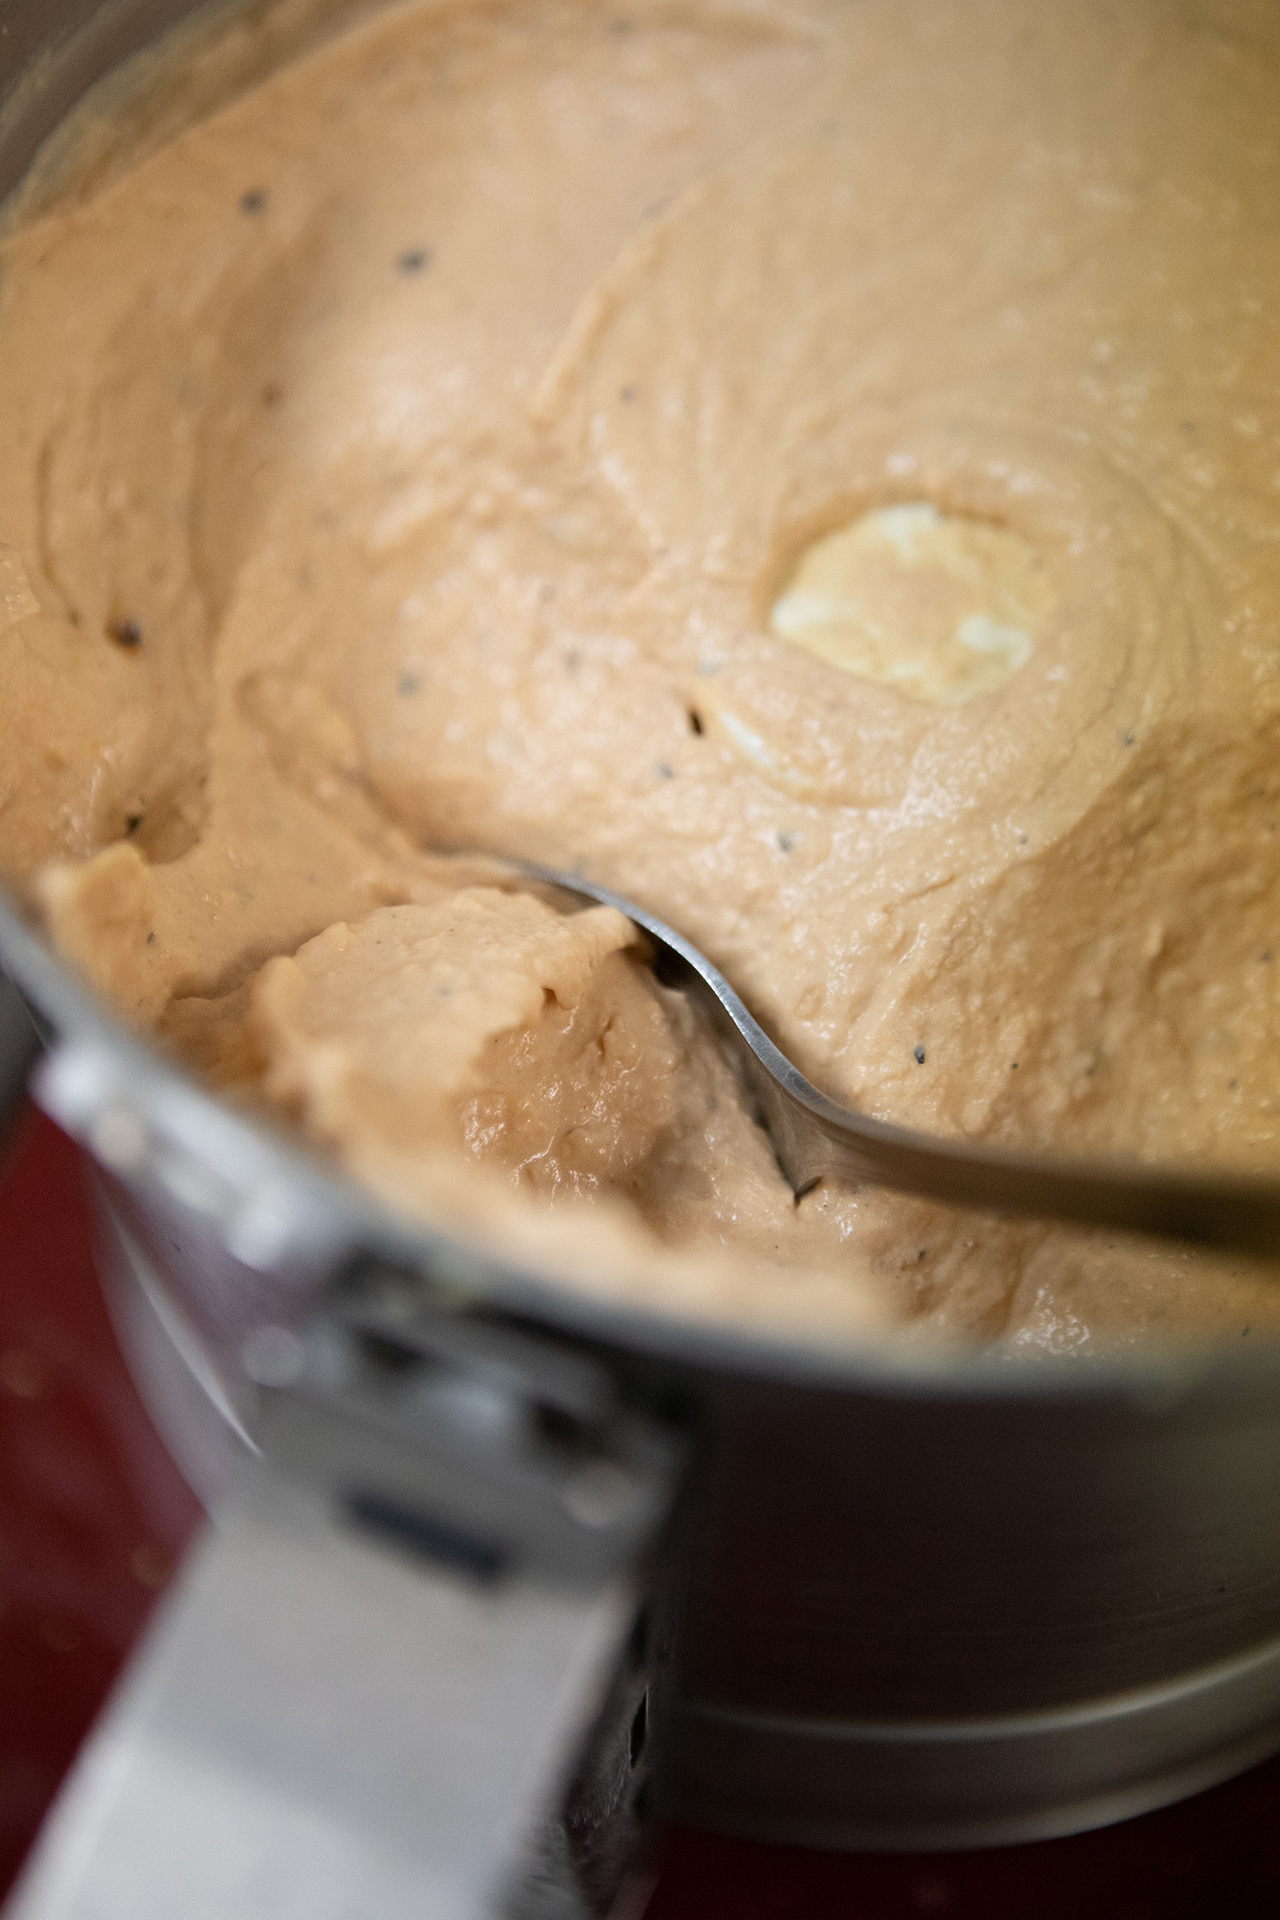 Silky smooth Roasted Tomato Habanero Hummus is pictured up close in a large metallic container.